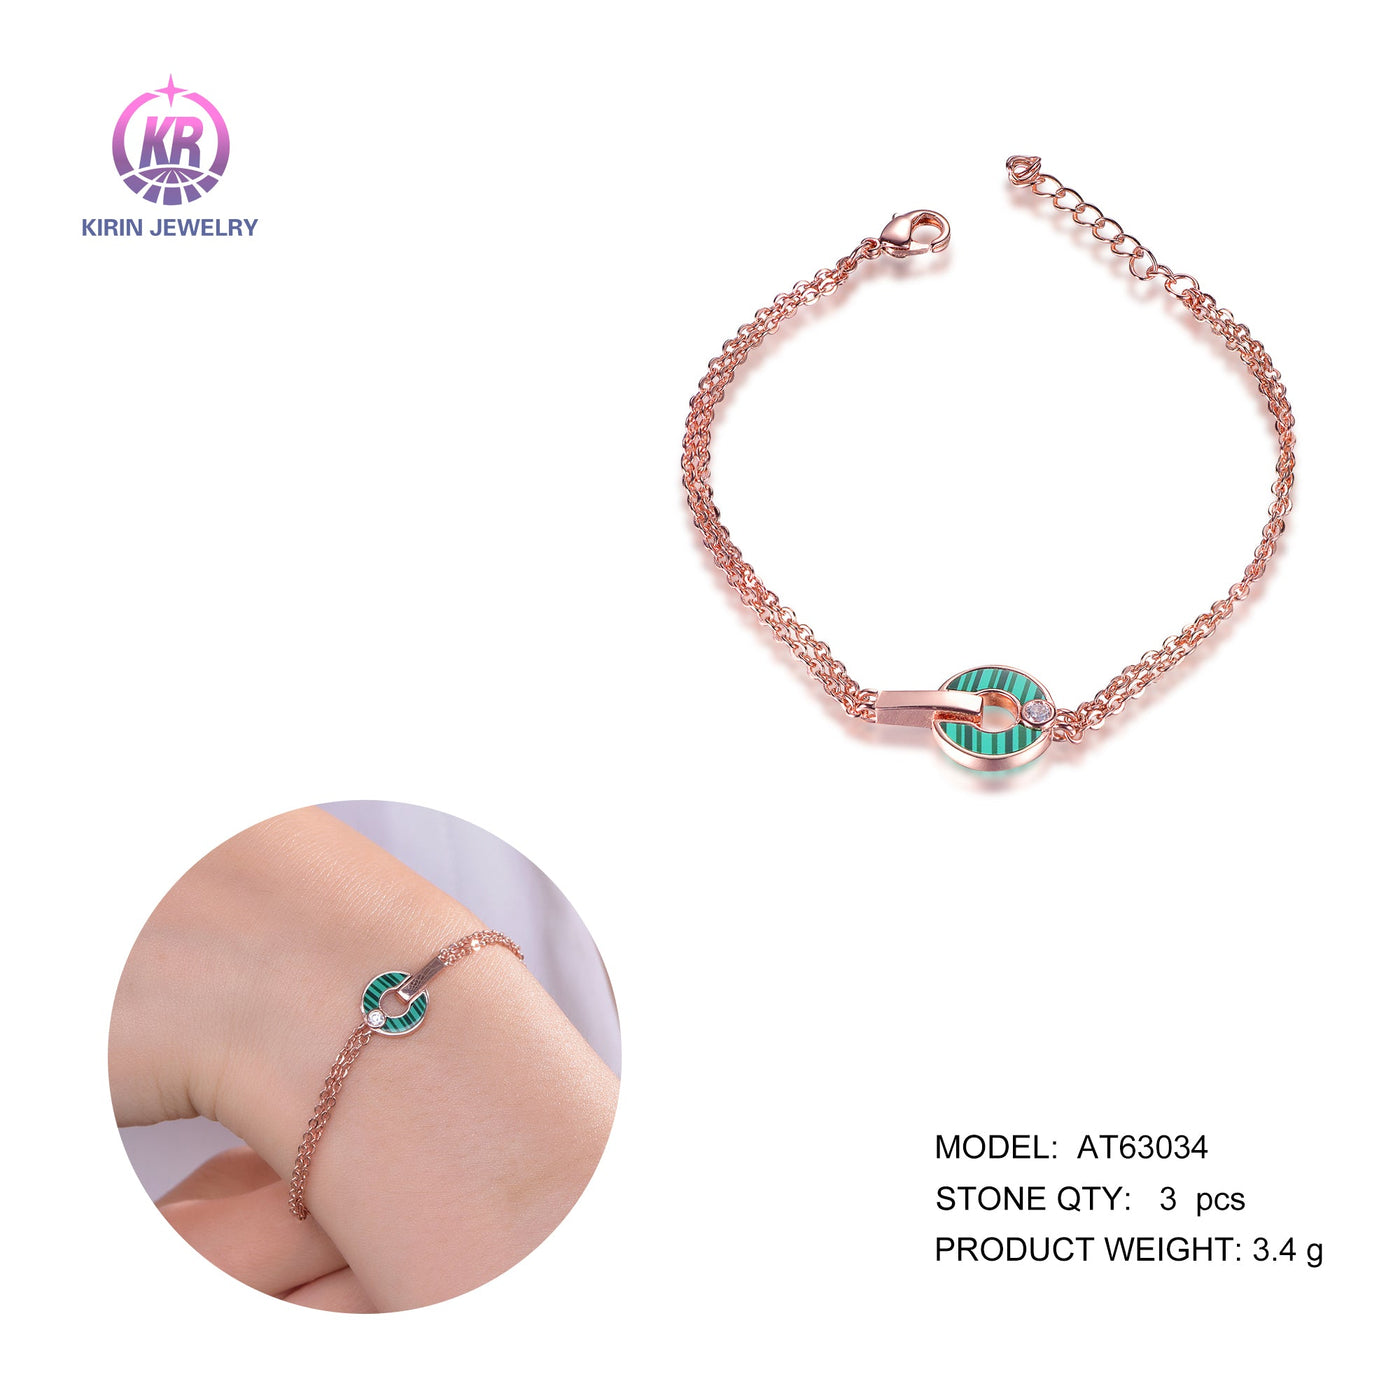 925 silver bracelet with rose gold plating 63034 Kirin Jewelry